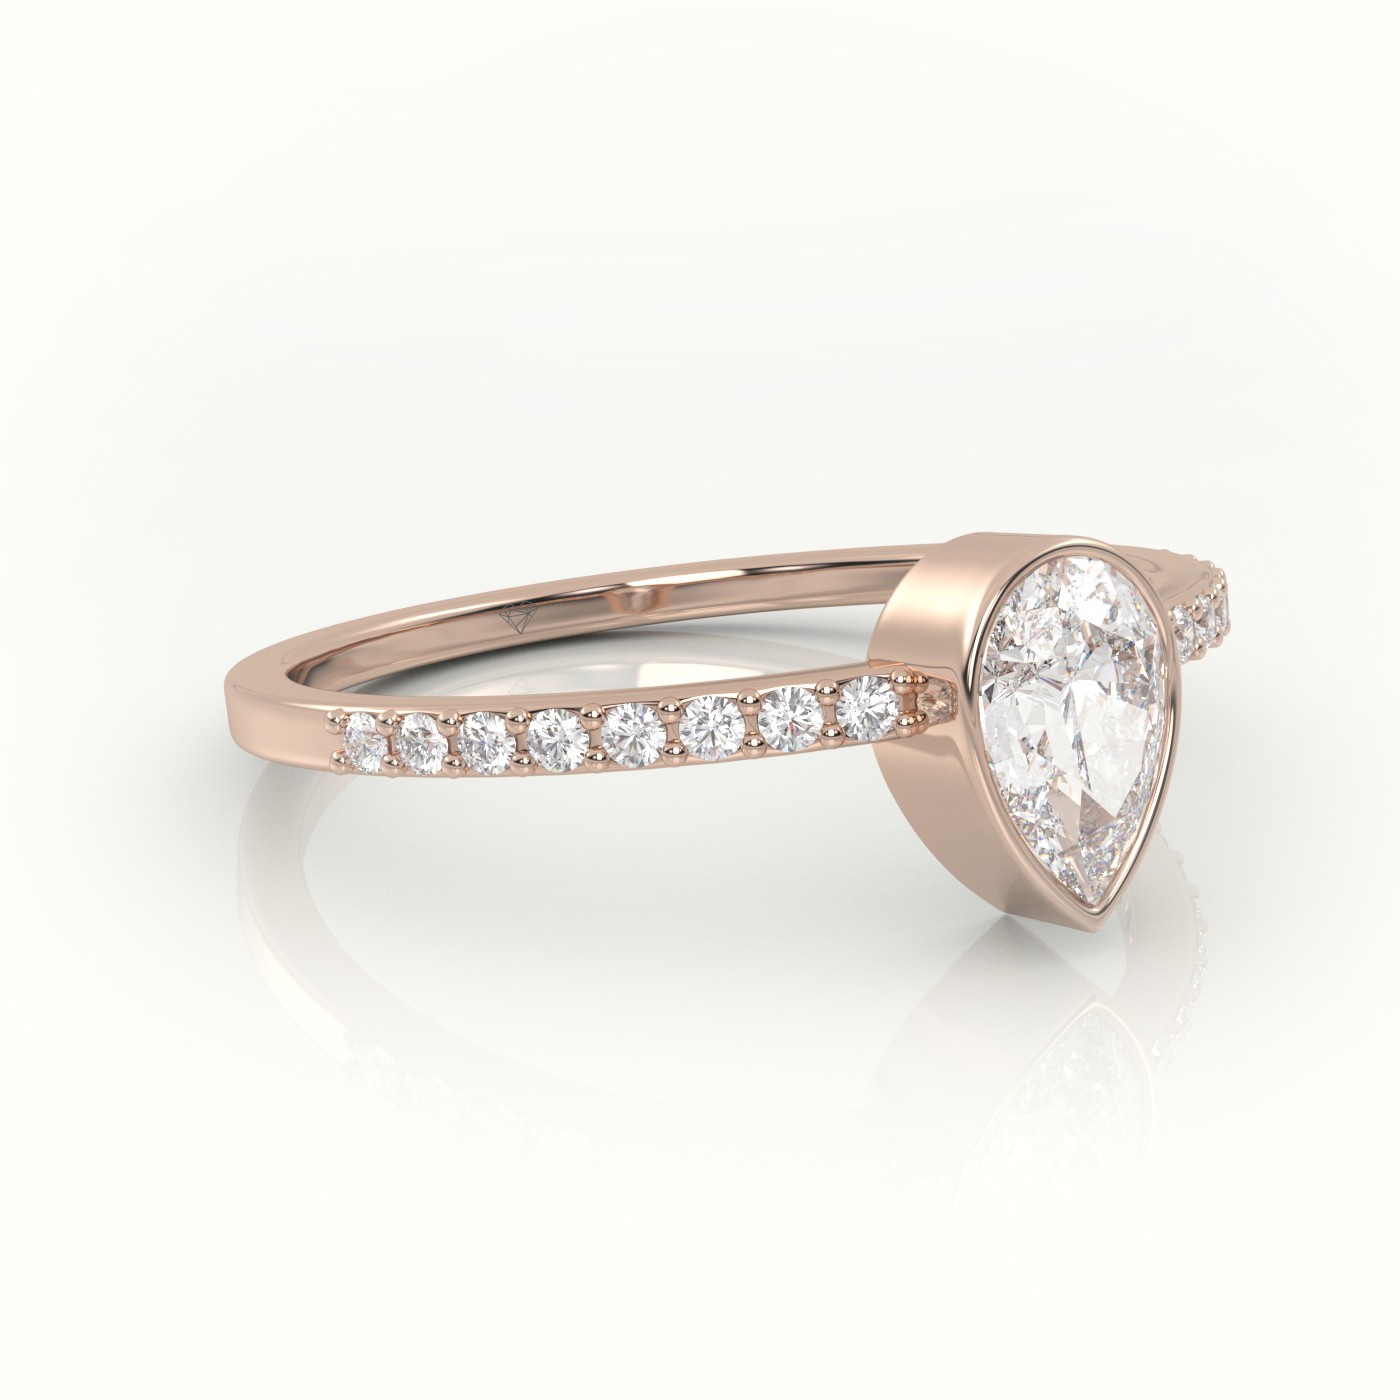 18K ROSE GOLD PEAR CUT DIAMOND CHANNEL SETTING ENGAGEMENT RING